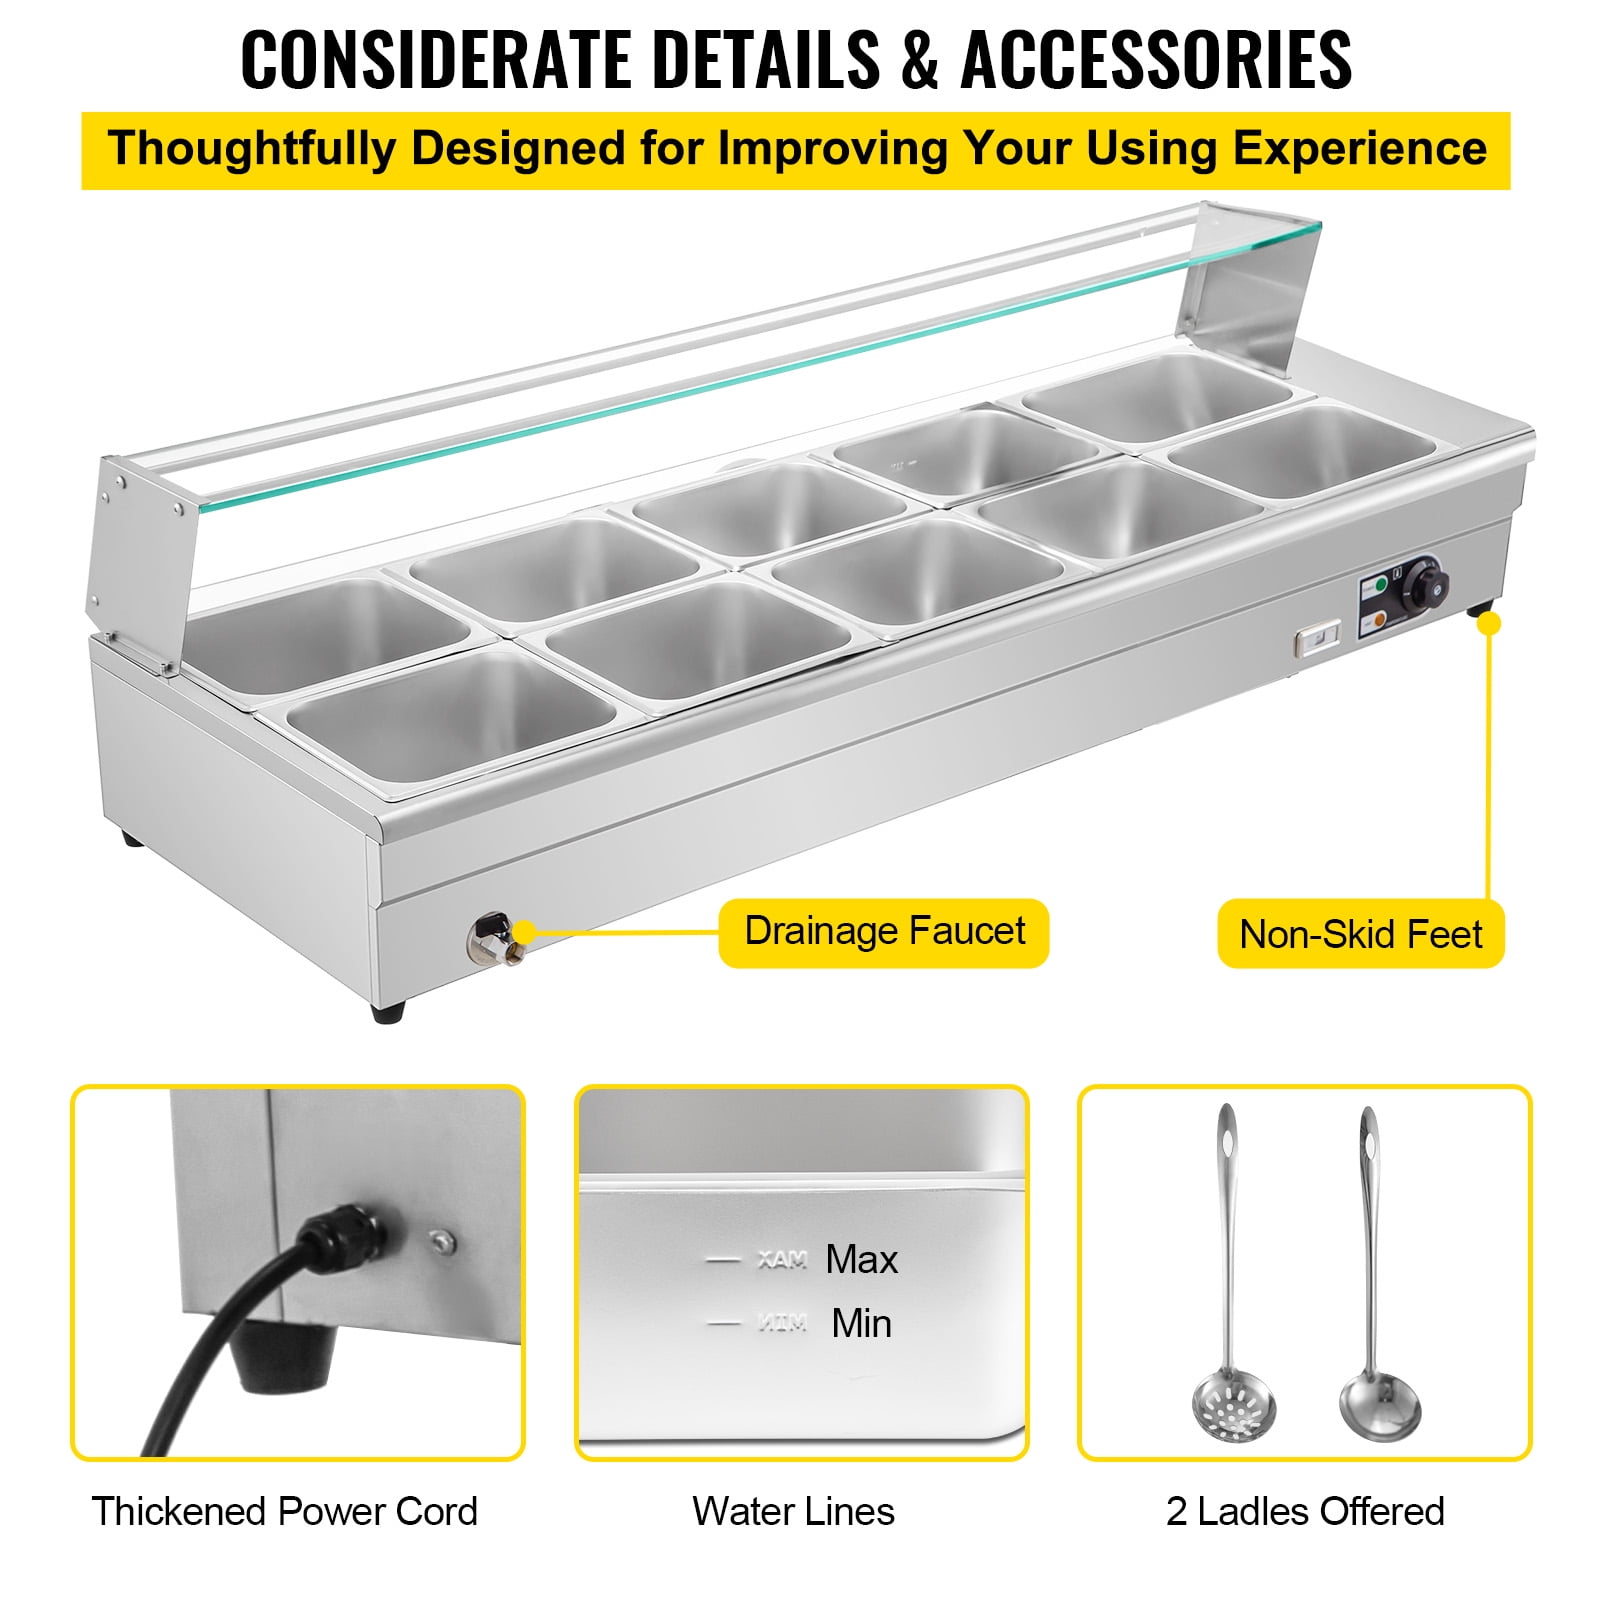 VEVORbrand 110V Bain Marie Food Warmer 5 Pan x 1/2 GN, Food Grade Stainelss  Steel Commercial Food Steam Table 6-Inch Deep, 1500W Electric Countertop Food  Warmer 55 Quart with Tempered Glass Shield - Walmart.com